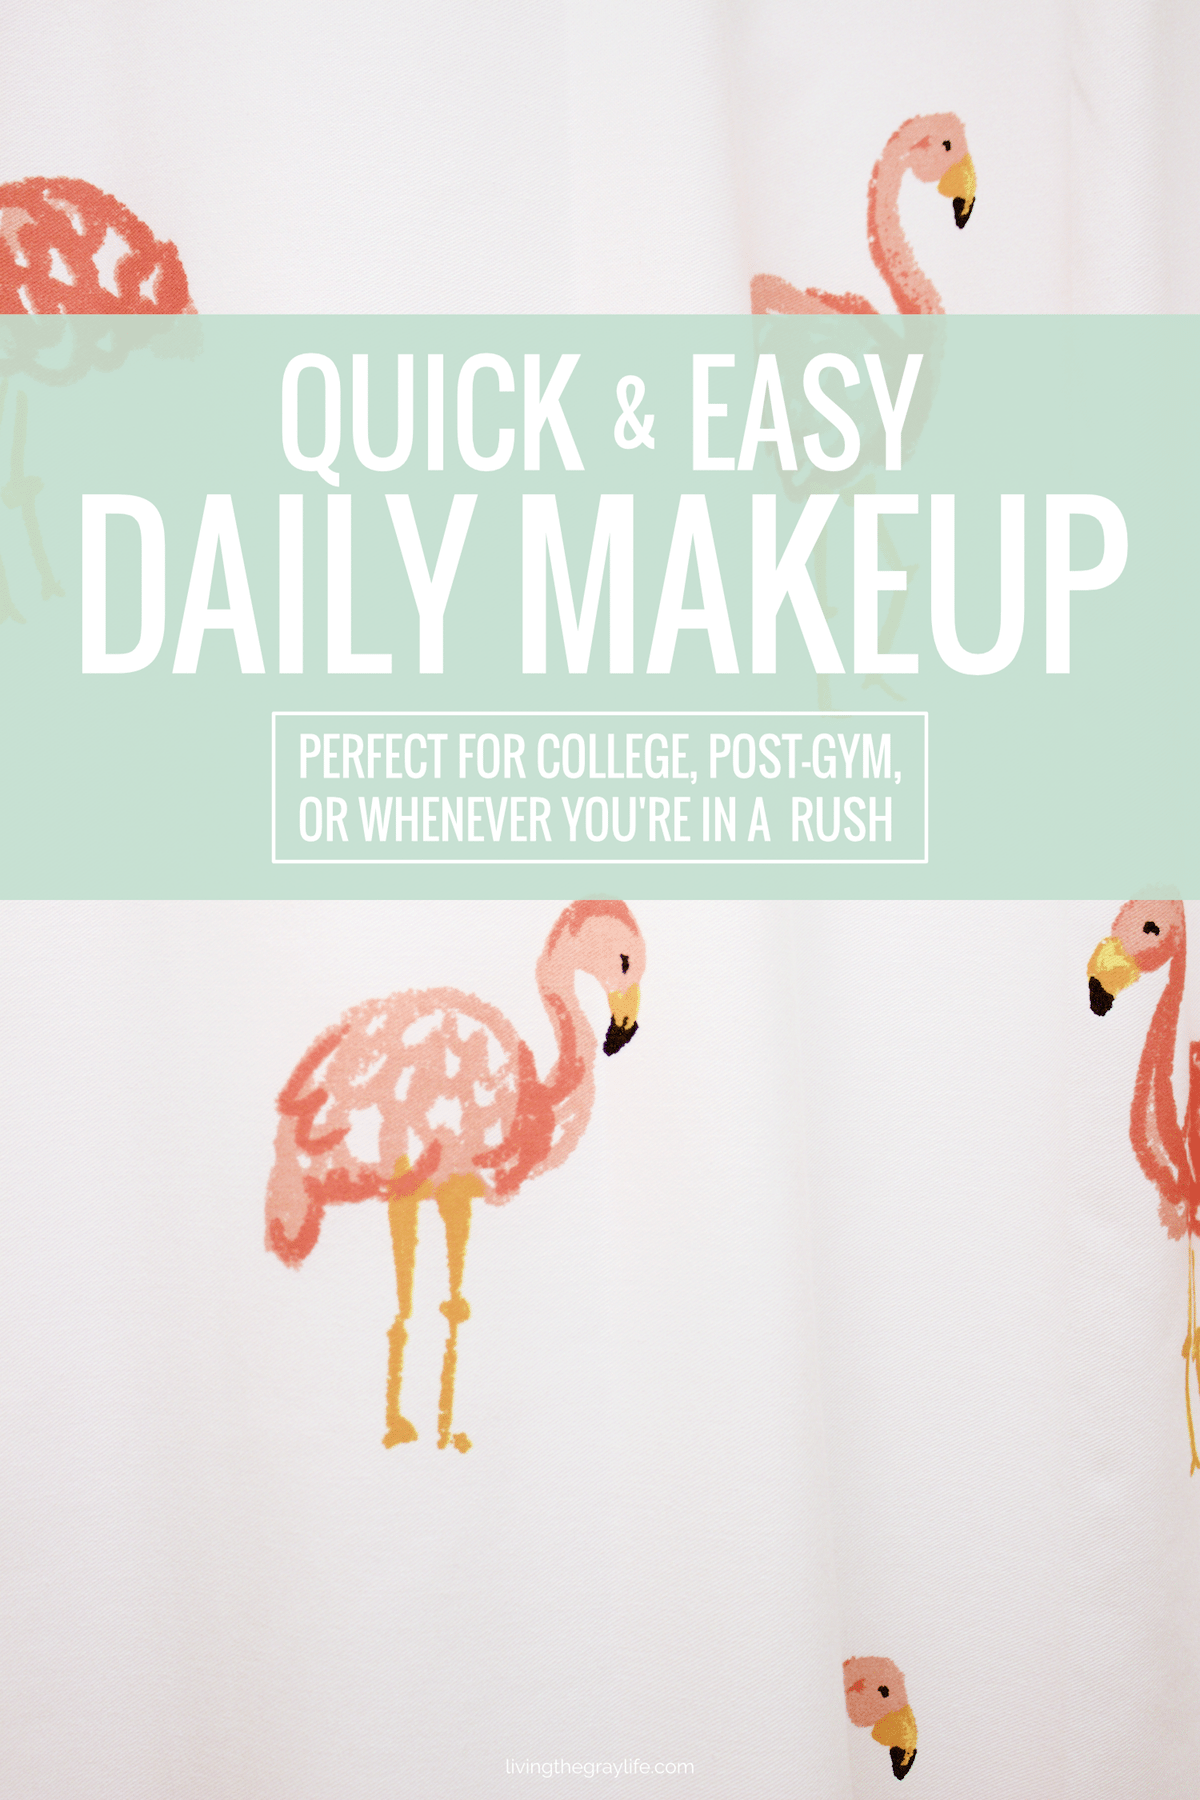 Quick & Easy Daily Makeup